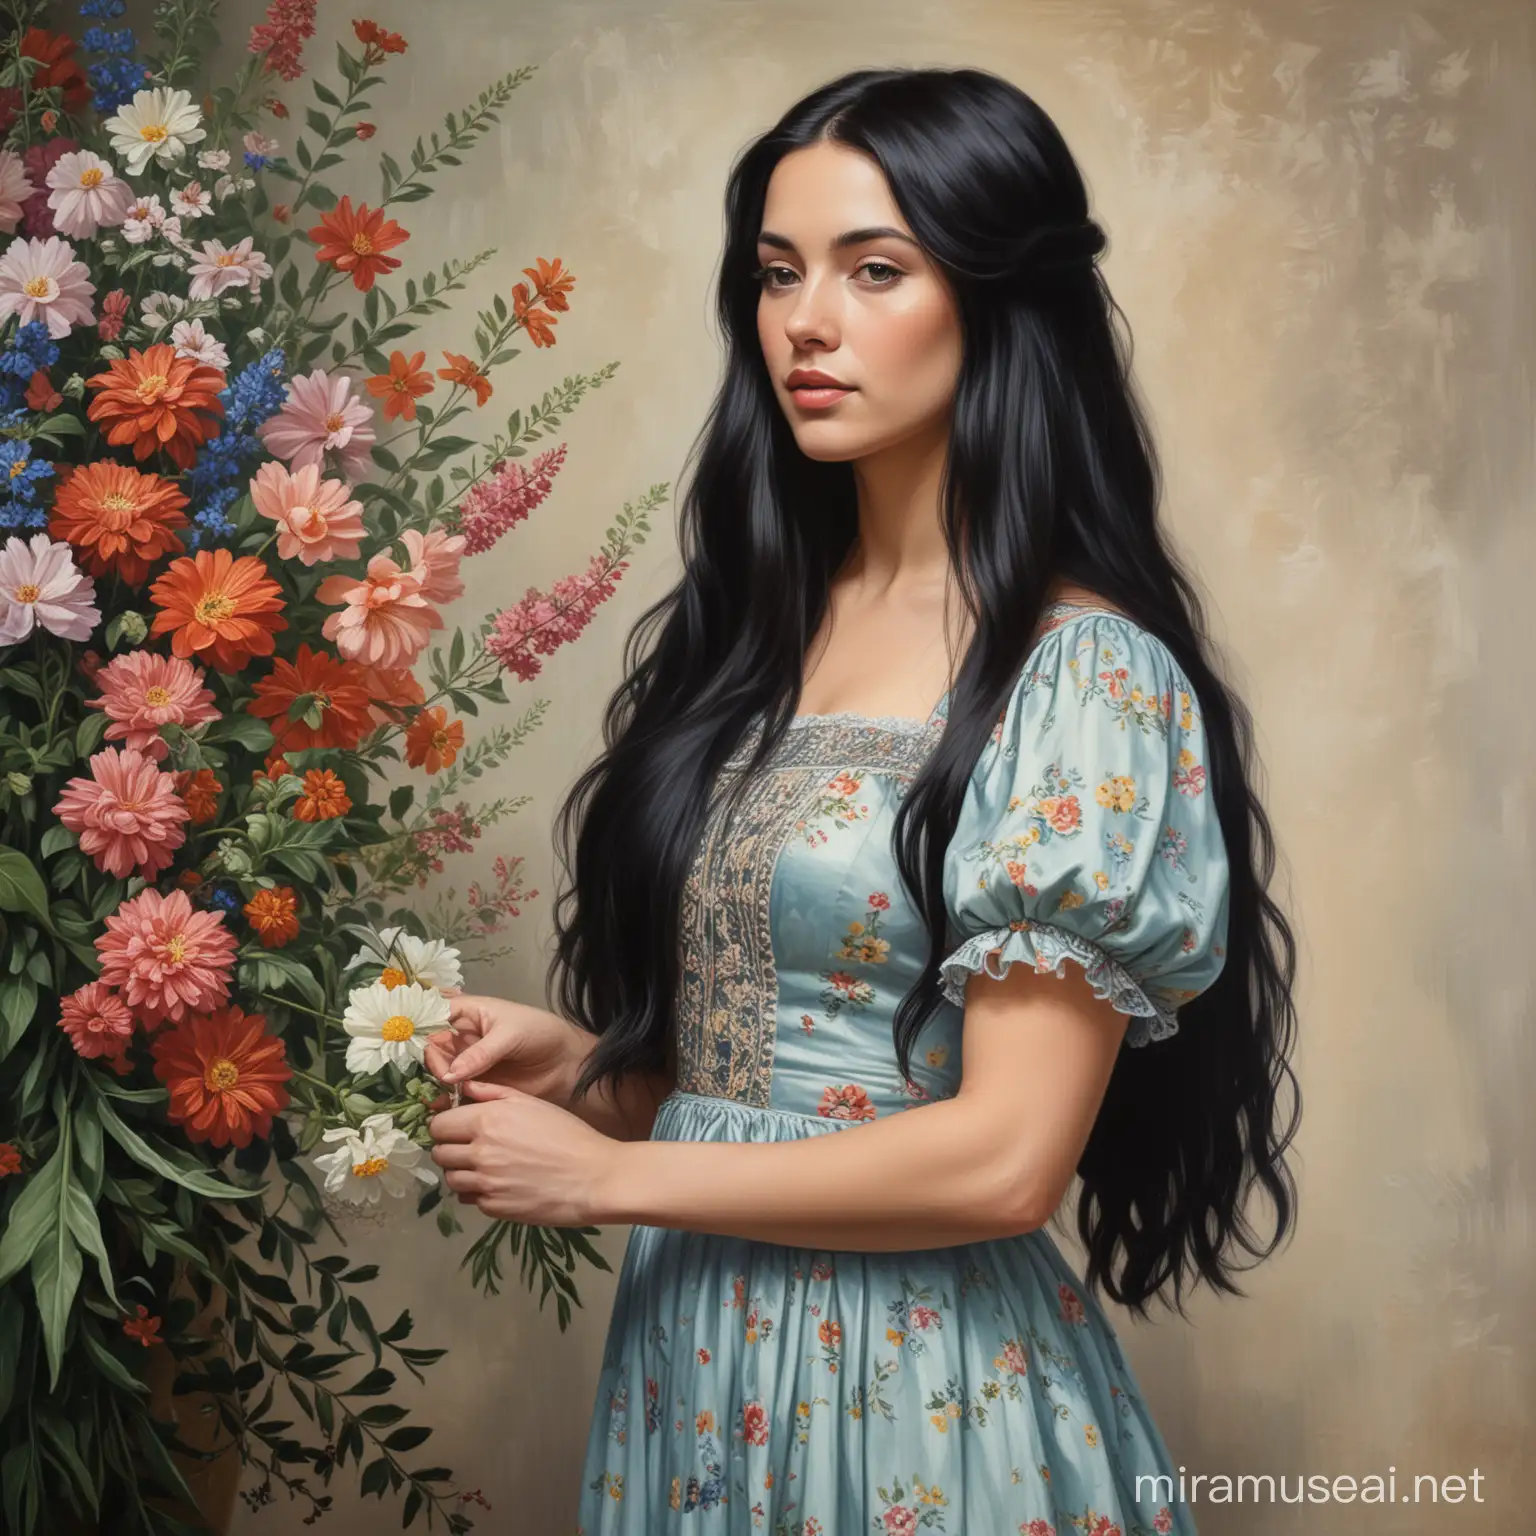 Vintage Woman Holding Flowers in Oil Painting